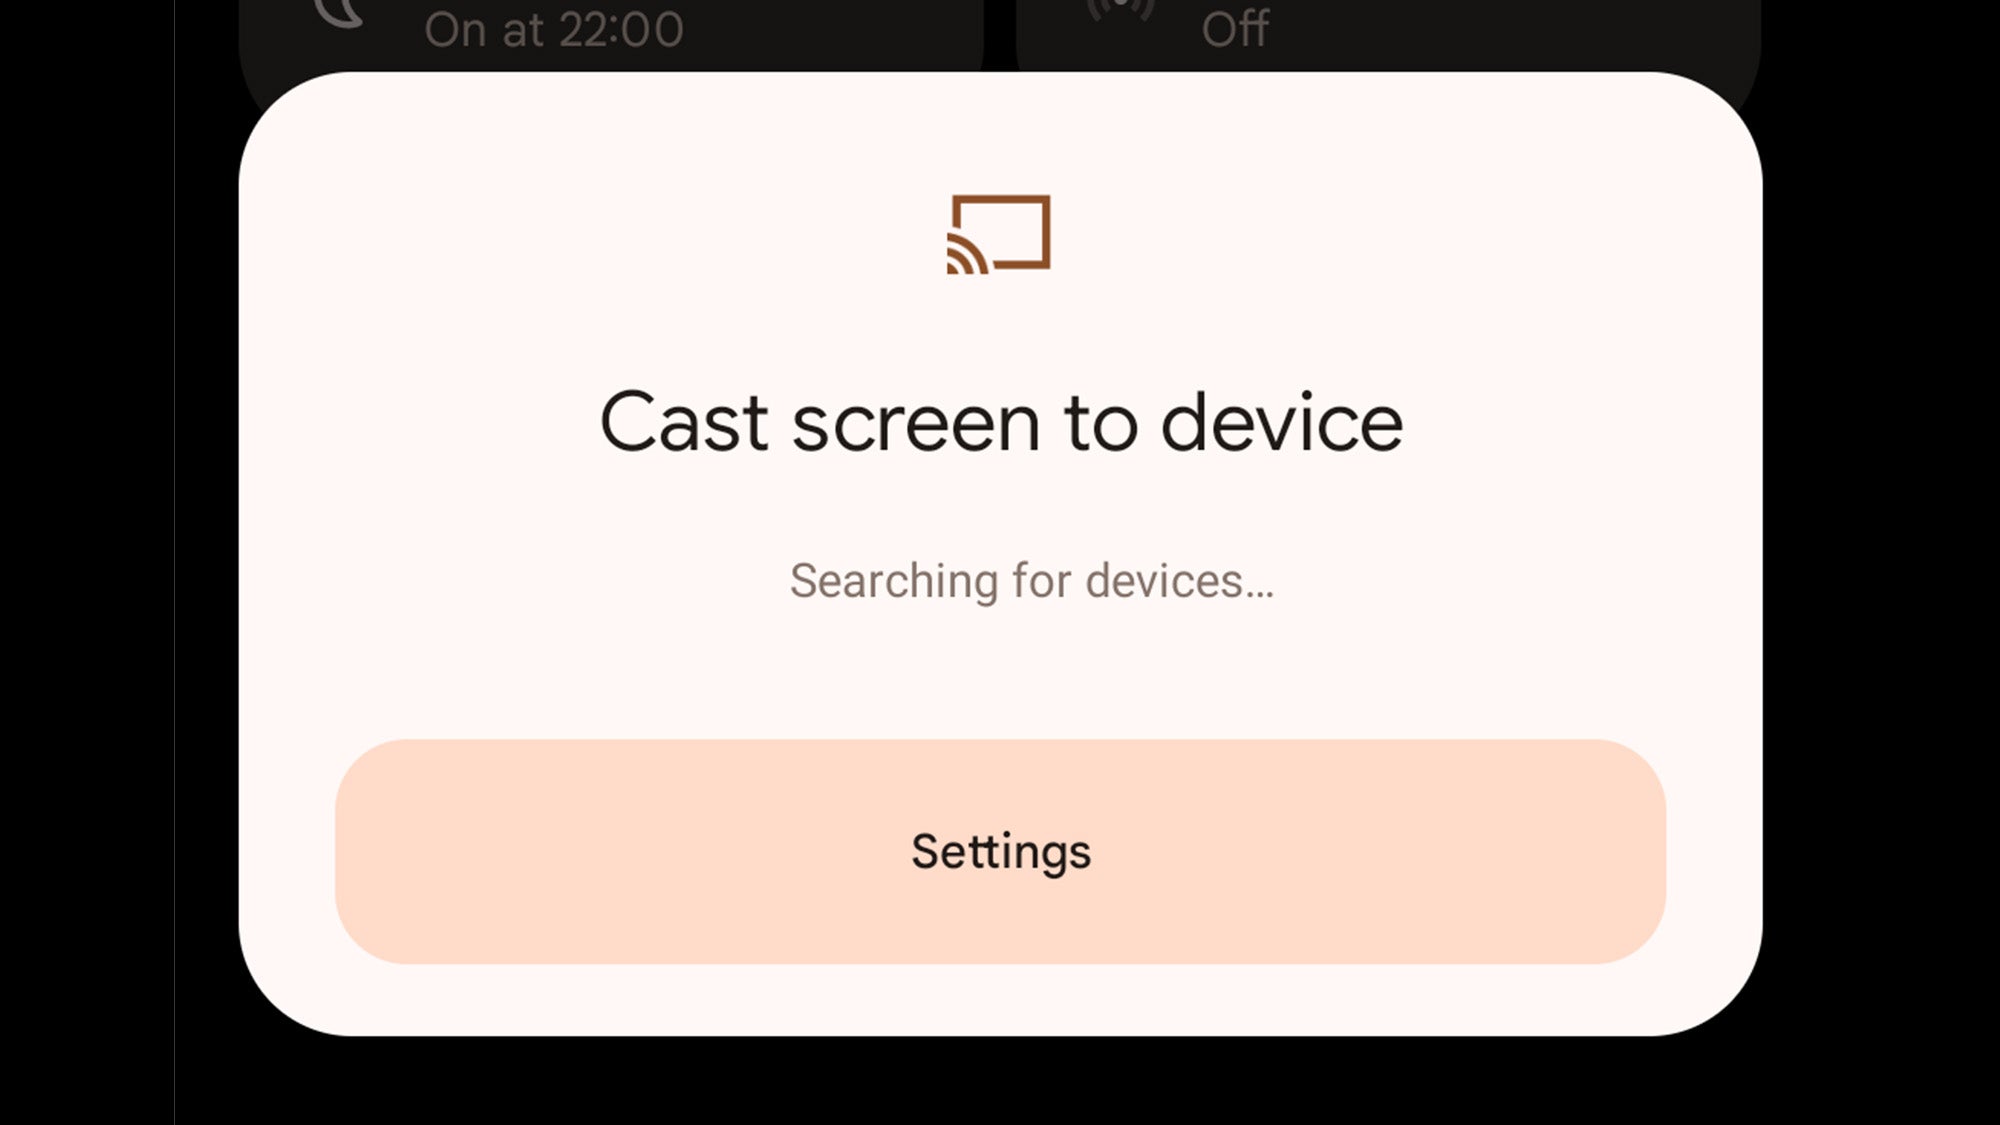 Android's screen cast option